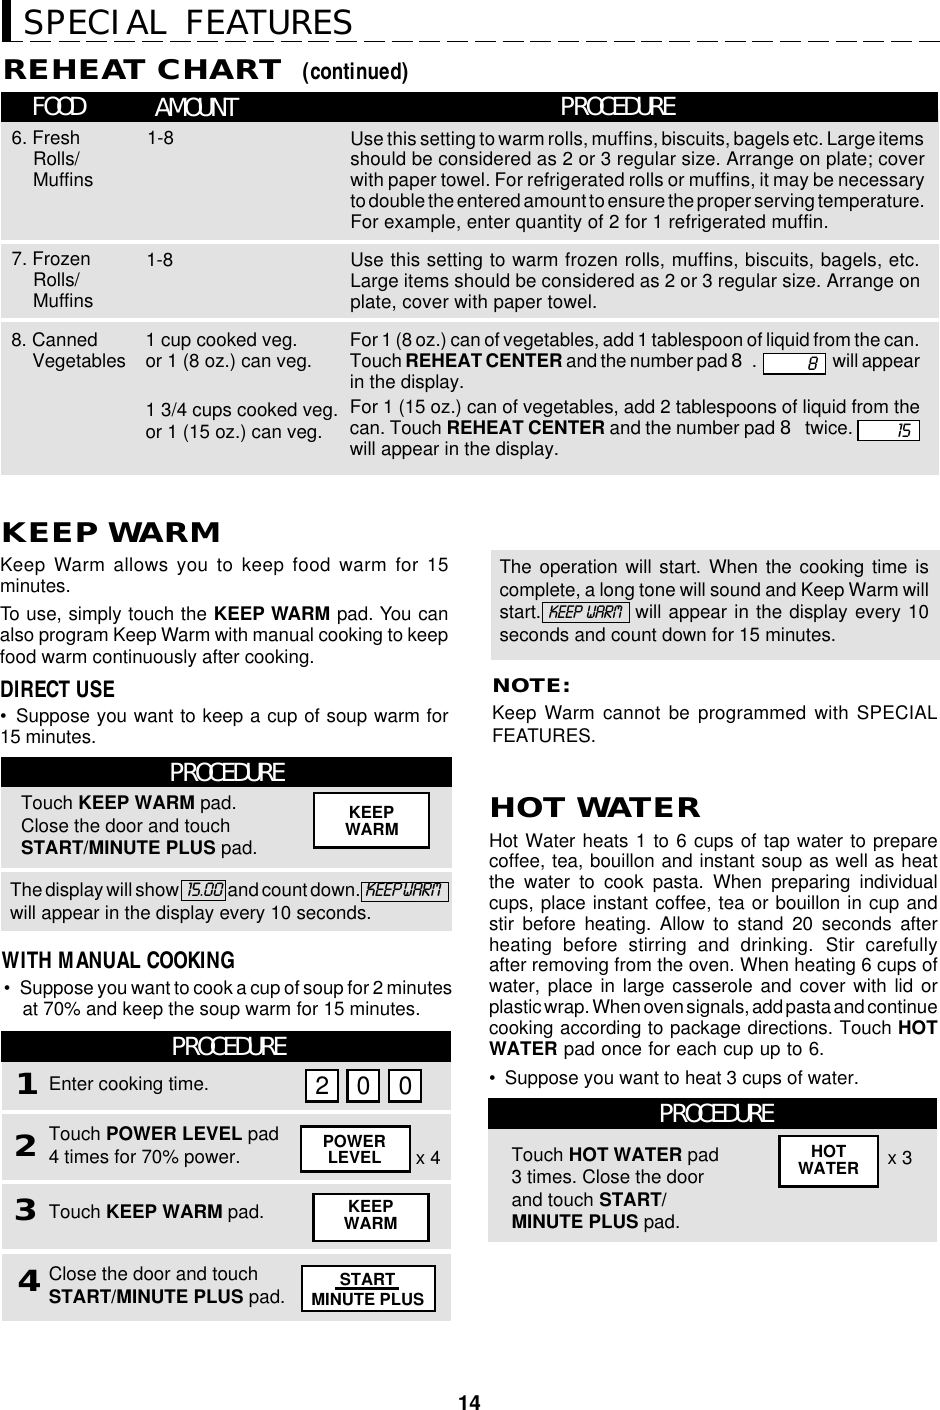 14REHEAT CHART  (continued)FOOD AMOUNT PROCEDURESPECIAL FEATURES7. FrozenRolls/Muffins1-86. FreshRolls/Muffins1-8KEEP WARMKeep Warm allows you to keep food warm for 15minutes.To  use, simply touch the KEEP WARM pad. You canalso program Keep Warm with manual cooking to keepfood warm continuously after cooking.DIRECT USE•Suppose you want to keep a cup of soup warm for15 minutes.PROCEDURETouch KEEP WARM pad.Close the door and touchSTART/MINUTE PLUS pad.The display will show   15.00  and count down.  KEEP WARMwill appear in the display every 10 seconds.•Suppose you want to cook a cup of soup for 2 minutesat 70% and keep the soup warm for 15 minutes.The operation will start. When the cooking time iscomplete, a long tone will sound and Keep Warm willstart. KEEP WARM  will appear in the display every 10seconds and count down for 15 minutes.WITH MANUAL COOKINGKEEPWARM8. CannedVegetables 1 cup cooked veg.or 1 (8 oz.) can veg.1 3/4 cups cooked veg.or 1 (15 oz.) can veg.PROCEDURE1Enter cooking time.2Touch POWER LEVEL pad4 times for 70% power.2 0 0POWERLEVEL x 43Touch KEEP WARM pad.HOT WATERHot Water heats 1 to 6 cups of tap water to preparecoffee, tea, bouillon and instant soup as well as heatthe water to cook pasta. When preparing individualcups, place instant coffee, tea or bouillon in cup andstir before heating. Allow to stand 20 seconds afterheating before stirring and drinking. Stir carefullyafter removing from the oven. When heating 6 cups ofwater, place in large casserole and cover with lid orplastic wrap. When oven signals, add pasta and continuecooking according to package directions. Touch HOTWATER pad once for each cup up to 6.•Suppose you want to heat 3 cups of water.PROCEDURETouch HOT WATER pad3 times. Close the doorand touch START/MINUTE PLUS pad.x 3HOTWATER4Close the door and touchSTART/MINUTE PLUS pad. STARTMINUTE PLUSKEEPWARMUse this setting to warm rolls, muffins, biscuits, bagels etc. Large itemsshould be considered as 2 or 3 regular size. Arrange on plate; coverwith paper towel. For refrigerated rolls or muffins, it may be necessaryto double the entered amount to ensure the proper serving temperature.For example, enter quantity of 2 for 1 refrigerated muffin.Use this setting to warm frozen rolls, muffins, biscuits, bagels, etc.Large items should be considered as 2 or 3 regular size. Arrange onplate, cover with paper towel.For 1 (8 oz.) can of vegetables, add 1 tablespoon of liquid from the can.Touch REHEAT CENTER and the number pad 8.     will appearin the display.For 1 (15 oz.) can of vegetables, add 2 tablespoons of liquid from thecan. Touch REHEAT CENTER and the number pad 8 twice. will appear in the display.815NOTE:Keep Warm cannot be programmed with SPECIALFEATURES.